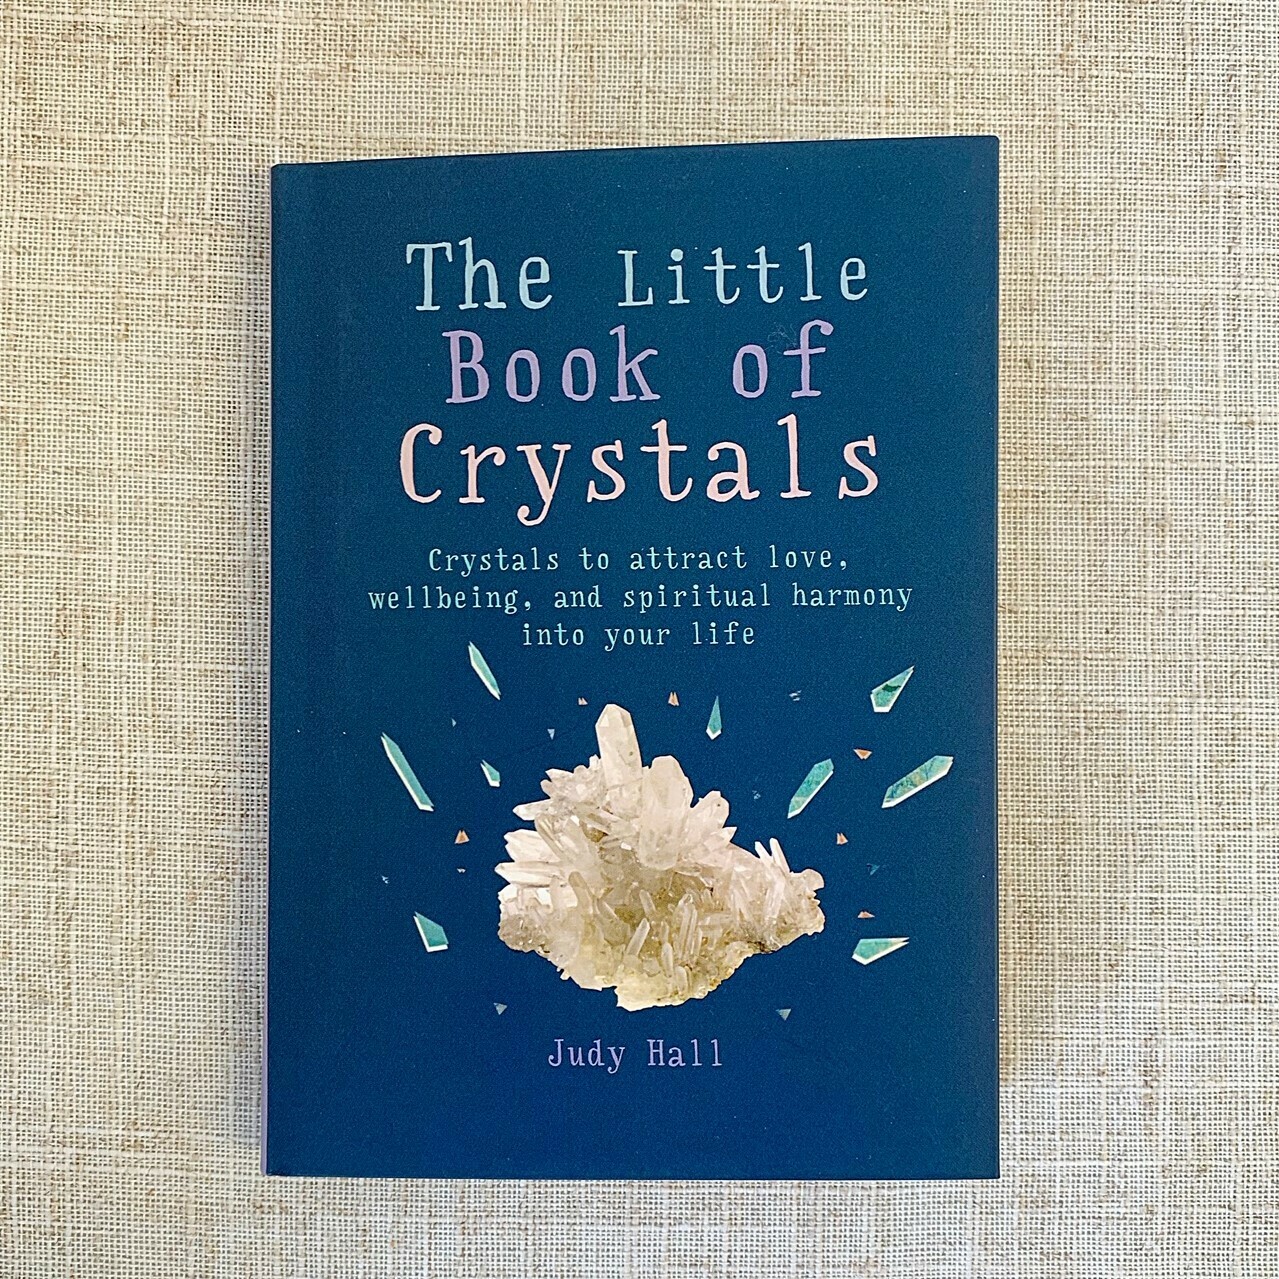 The Little Book of Crystals